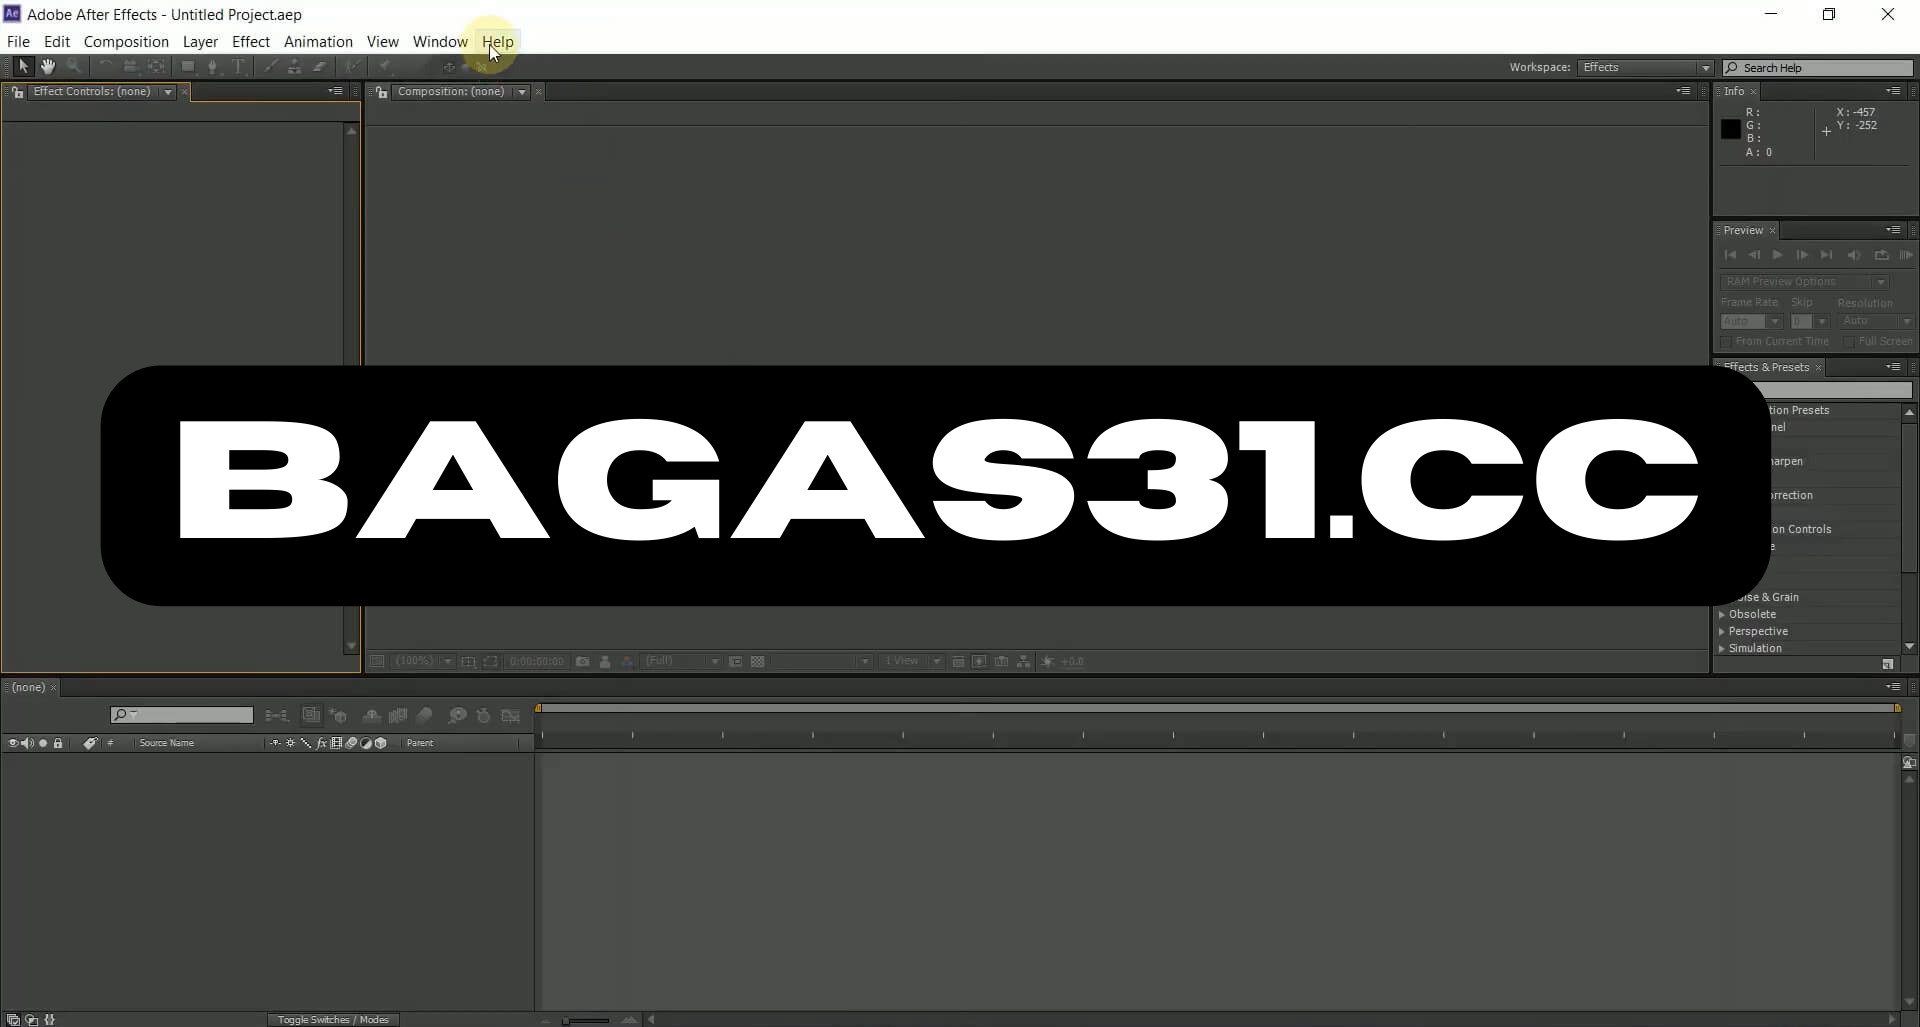 download after effects cs6 bagas31